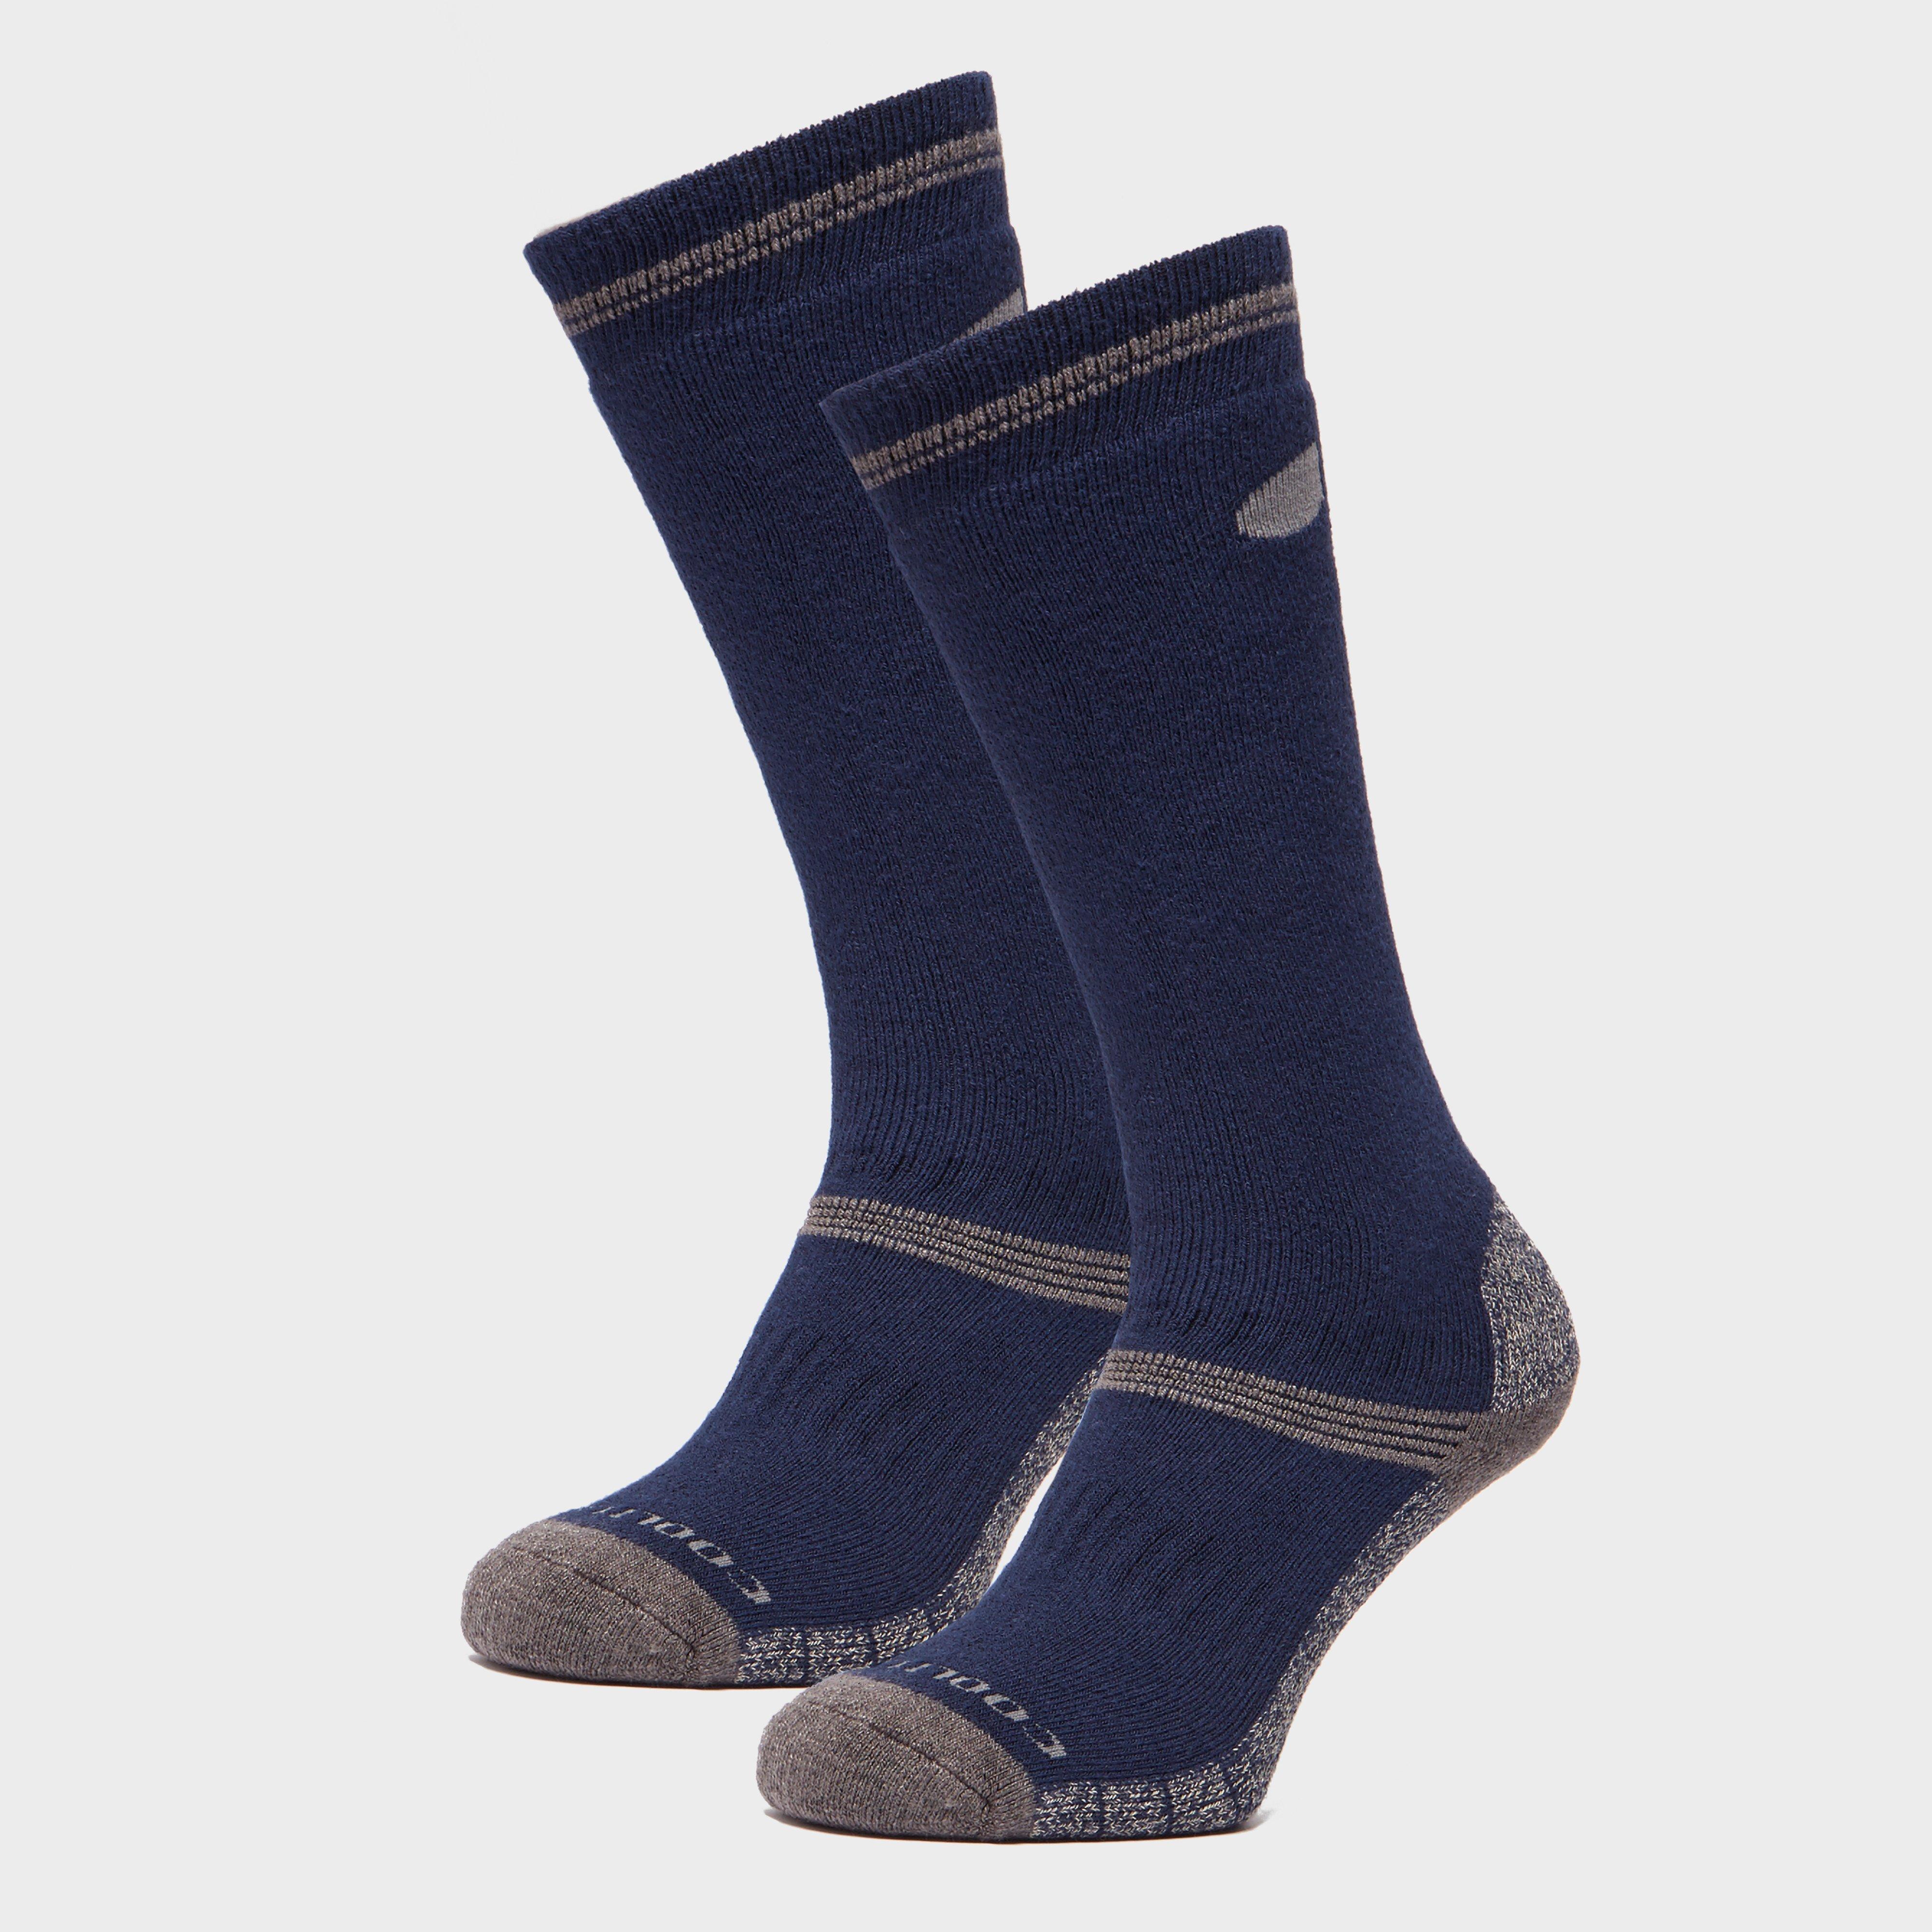 Peter Storm Midweight Socks - 2 Pack  Navy